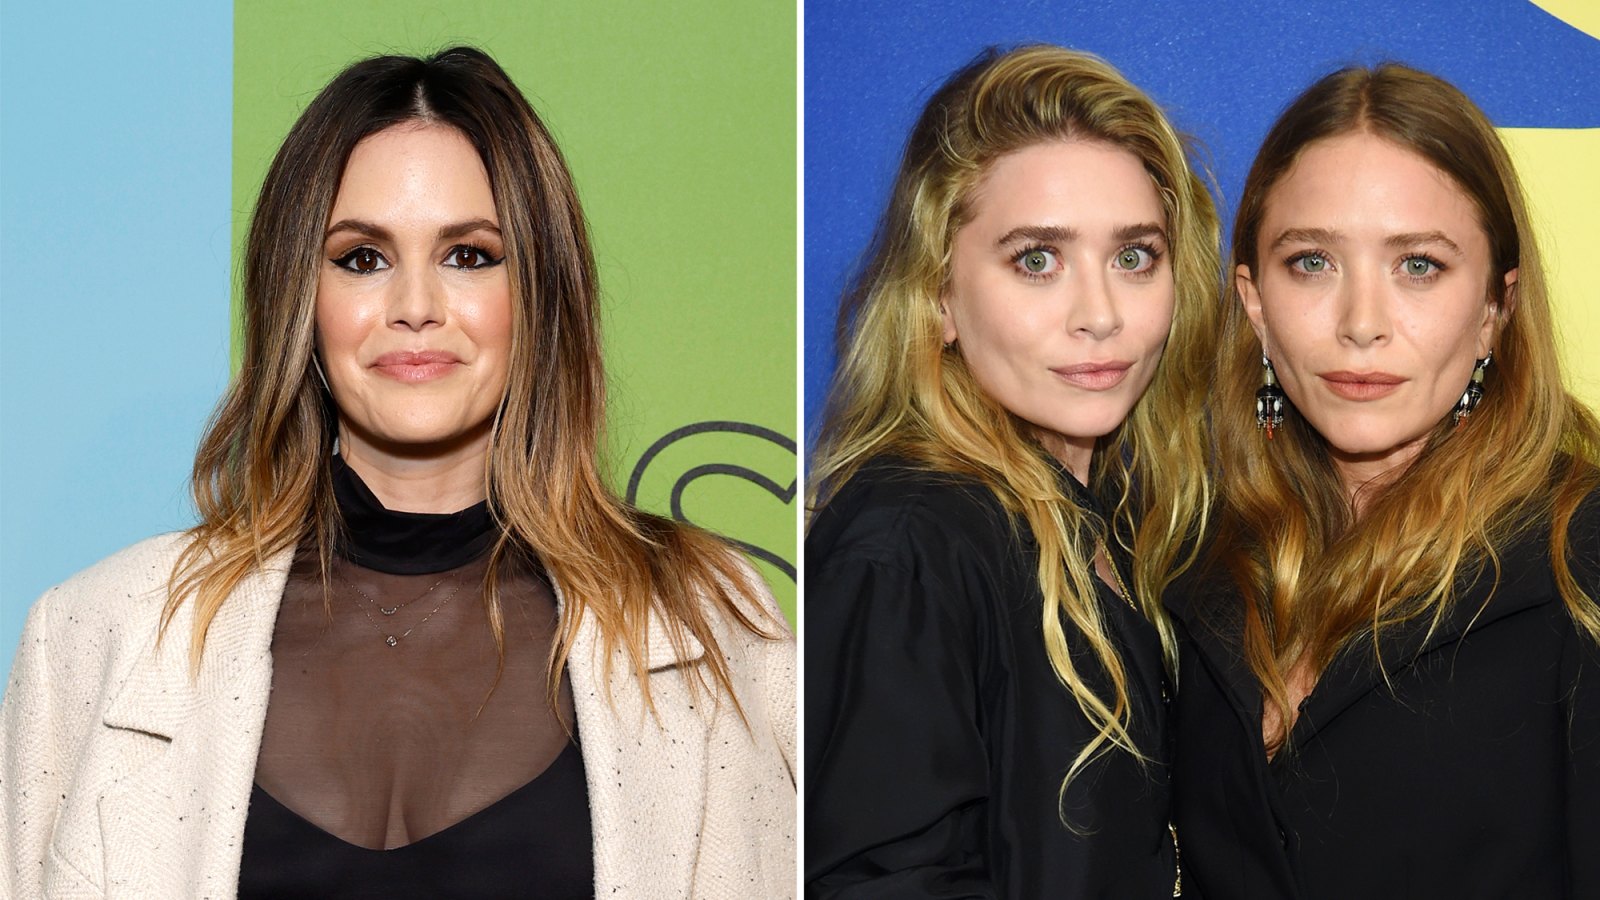 Rachel Bilson Says Olsen Twins 'Rescued' Her From Mob of Adam Brody Fans